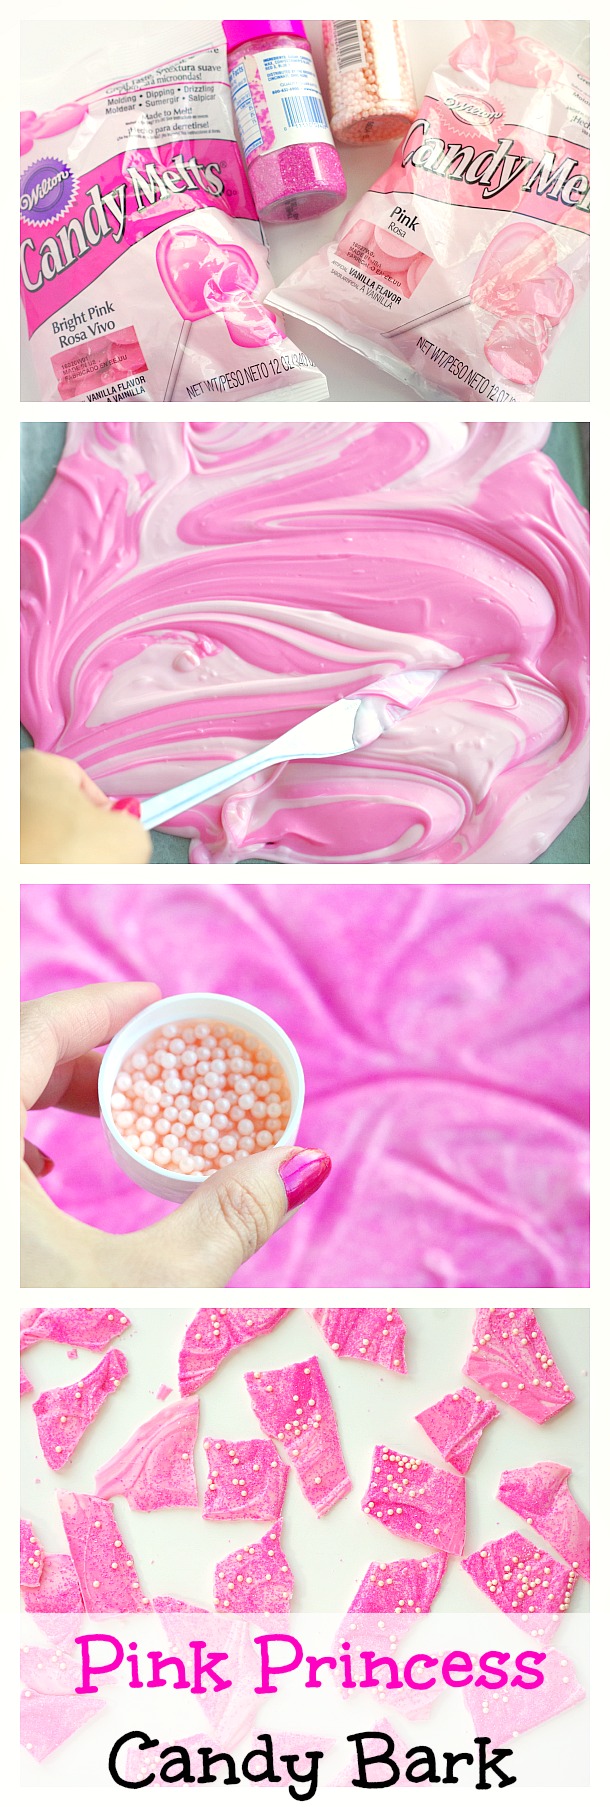 Pink Princess Candy Bark! This easy dessert is fun for princess parties and for girlie girls. Simple to make and kids can help out.